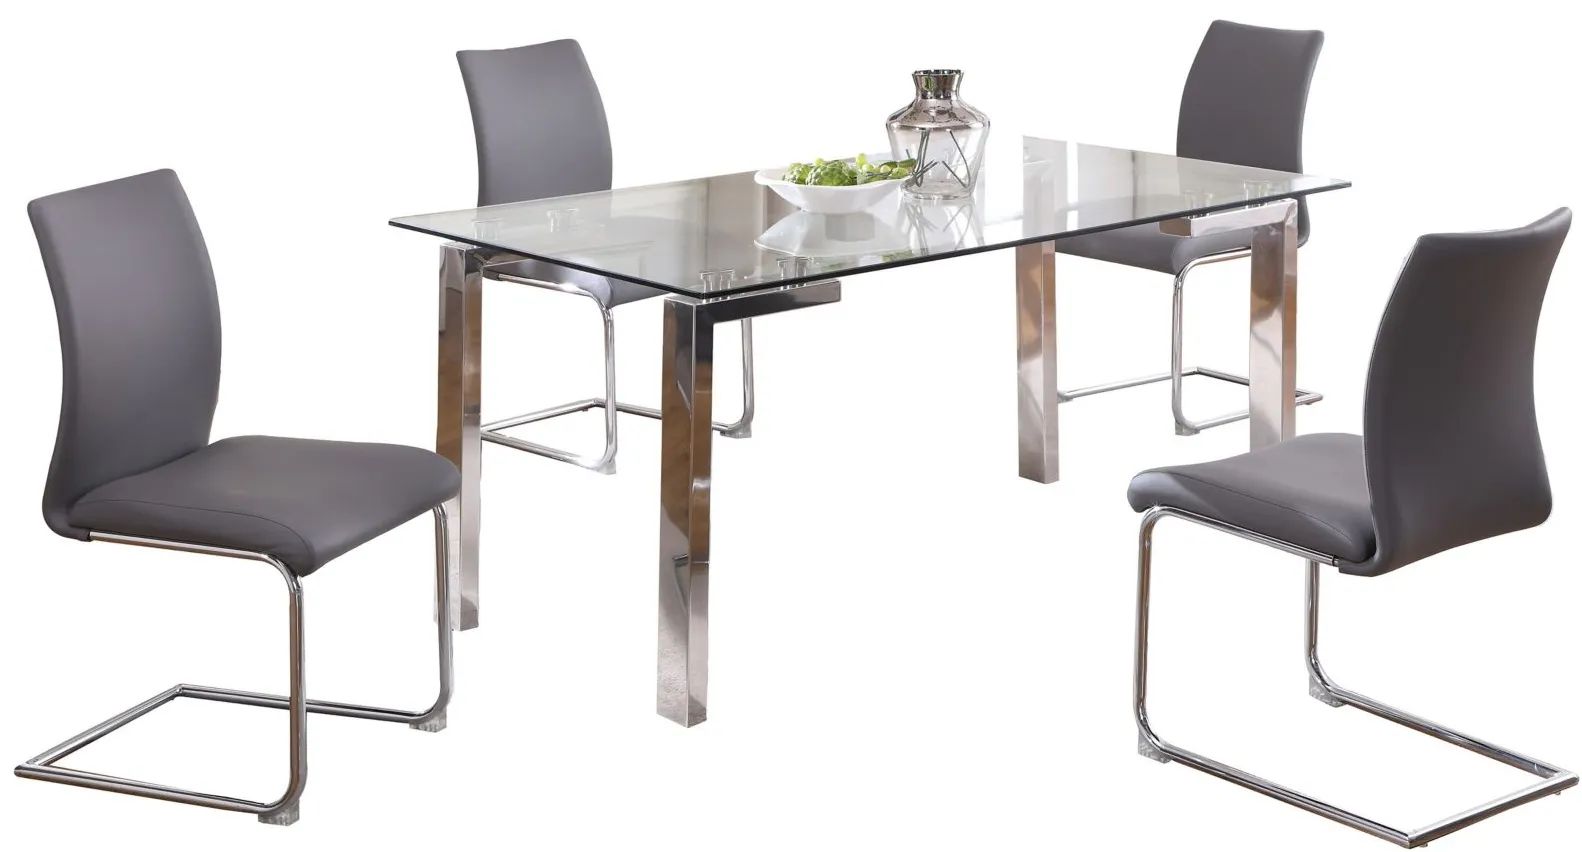 Cristina 5-pc. Glass Dining Set in Gray by Chintaly Imports